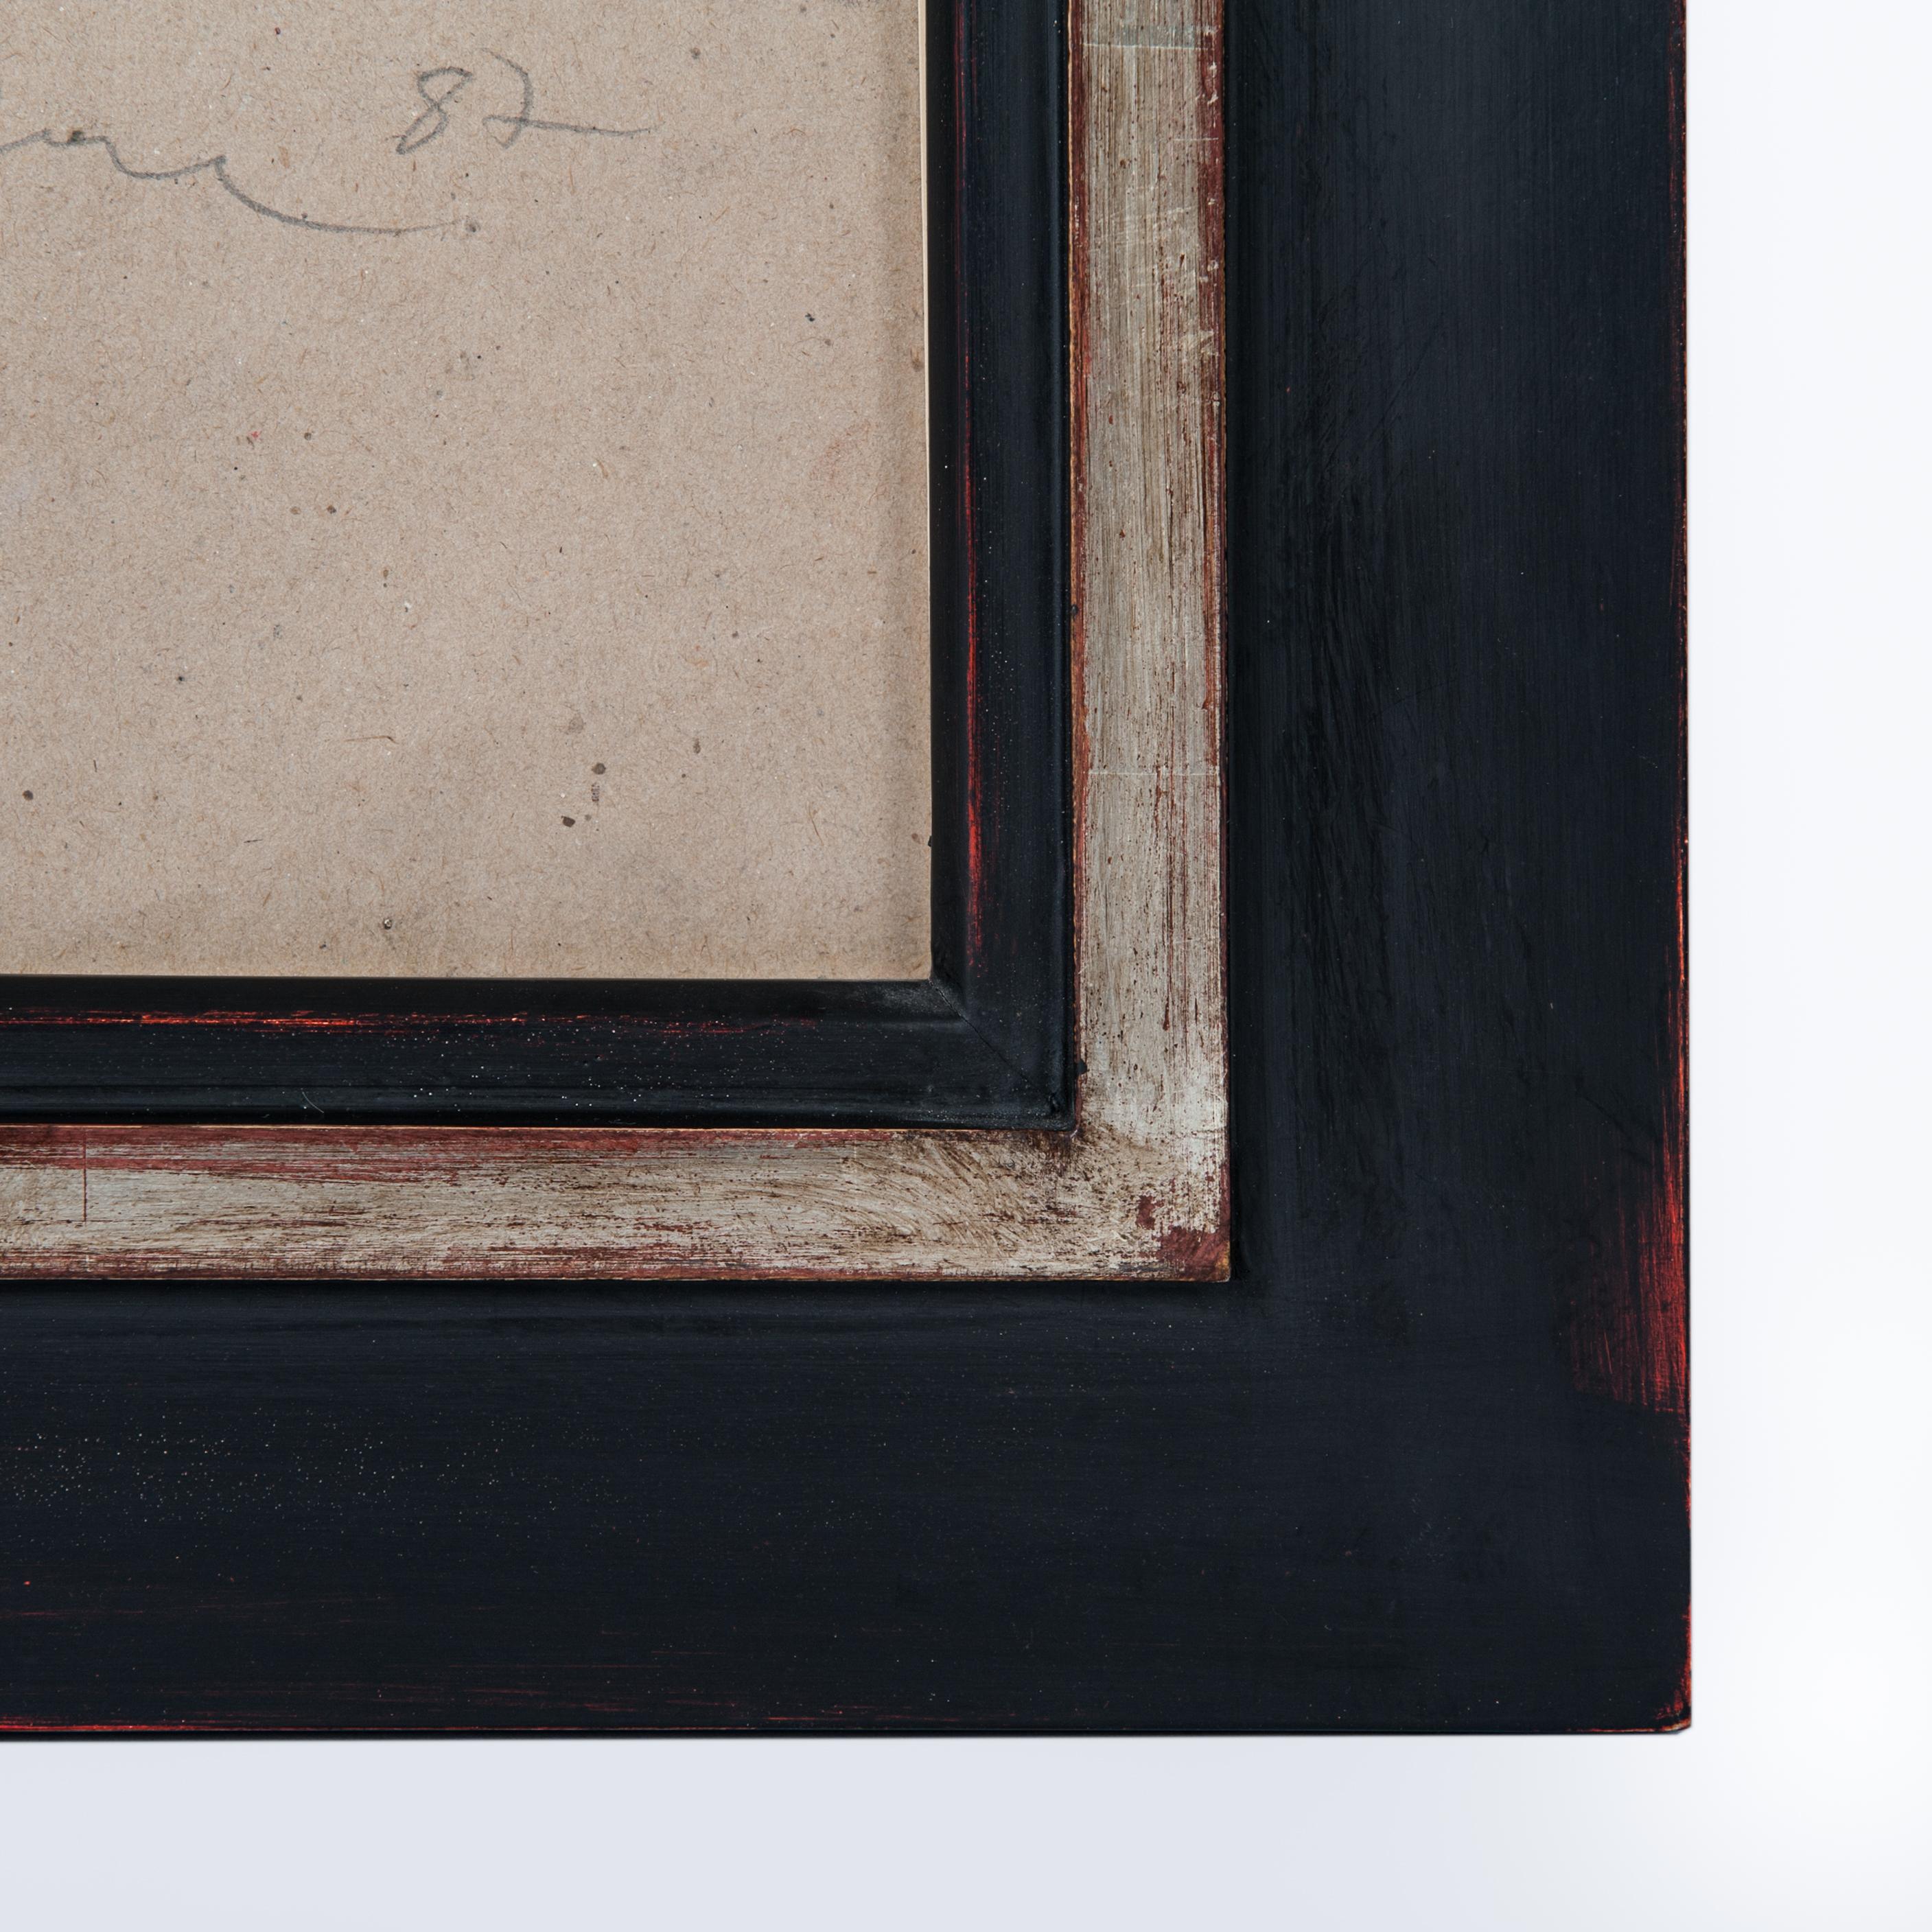 French Charcoal Drawing Black, Beige, Red and White Michel Batlle 1987 Handworked Frame For Sale